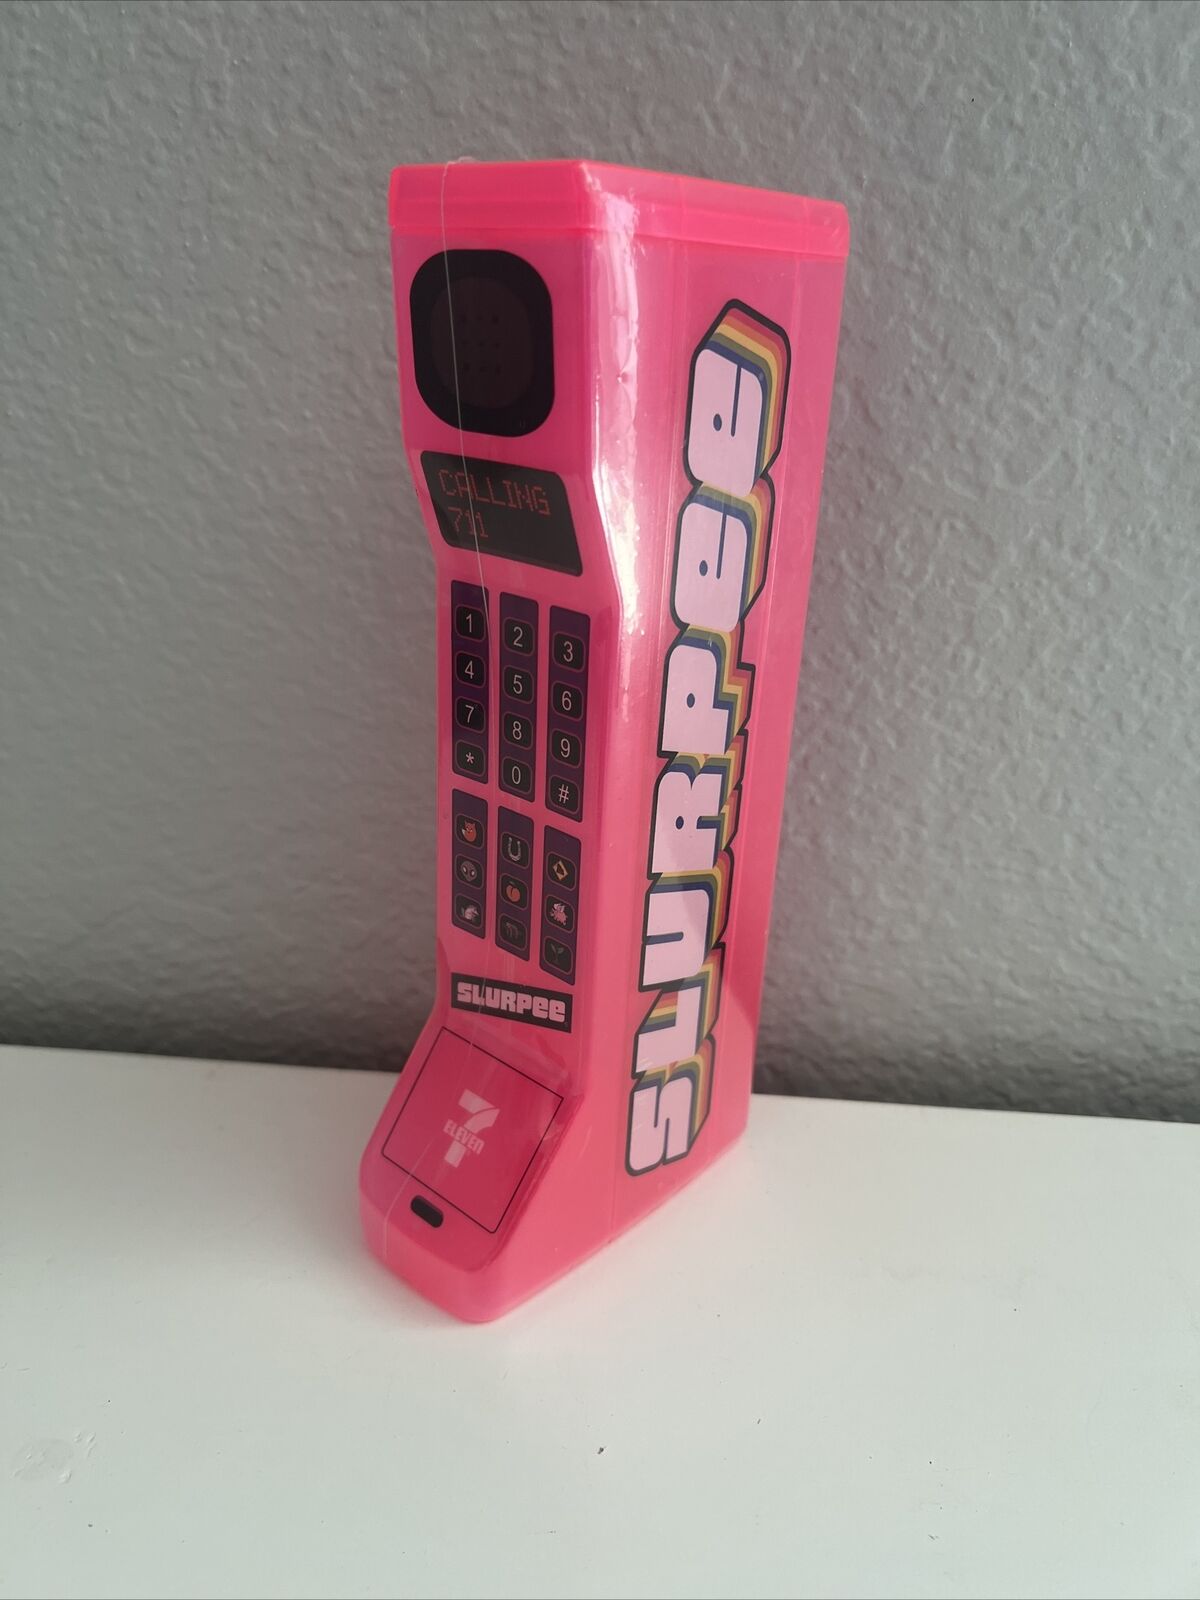 New Neon Pink Slurpee 7 Eleven 711 Cell Phone  Shaped Cup 80\'s Retro Pop Culture